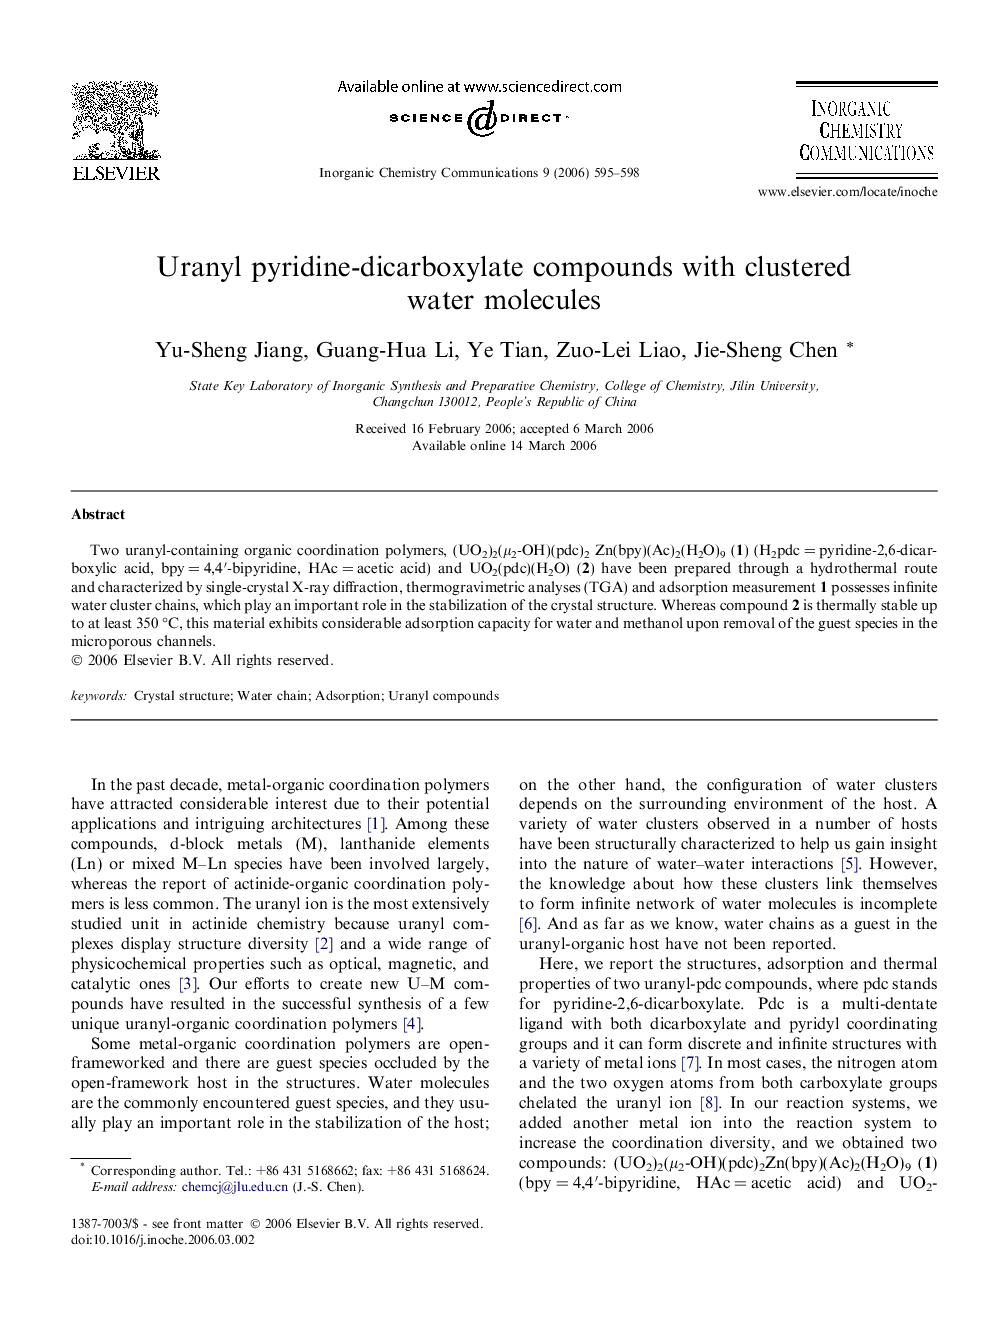 Uranyl pyridine-dicarboxylate compounds with clustered water molecules